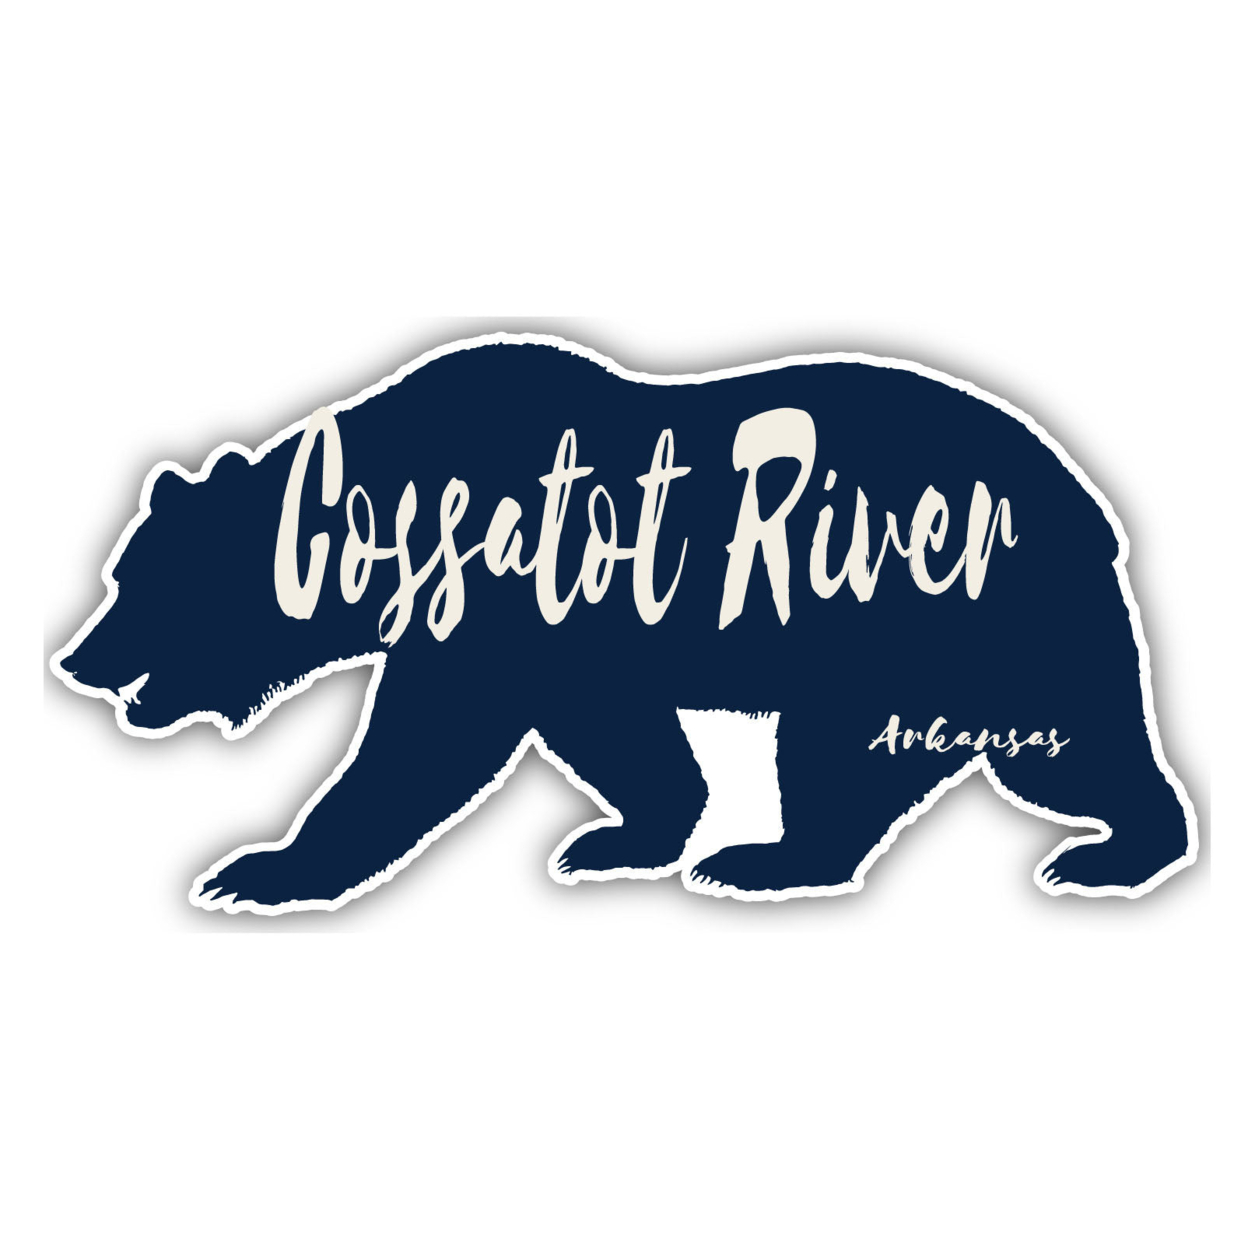 Cossatot River Arkansas Souvenir Decorative Stickers (Choose Theme And Size) - 4-Pack, 12-Inch, Great Outdoors